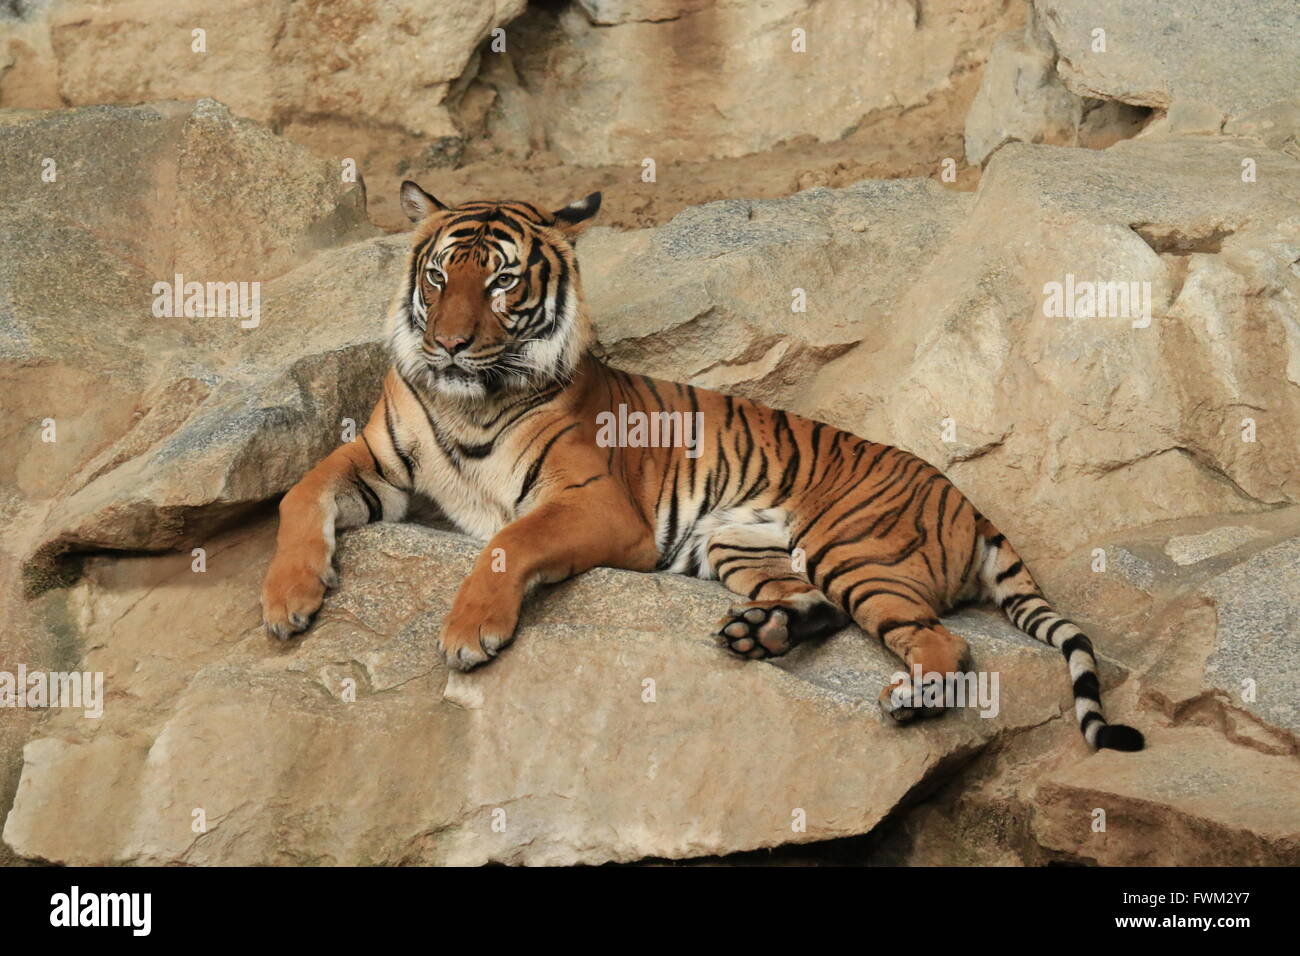 Tiger Resting On Rocks At Zoo Stock Photo